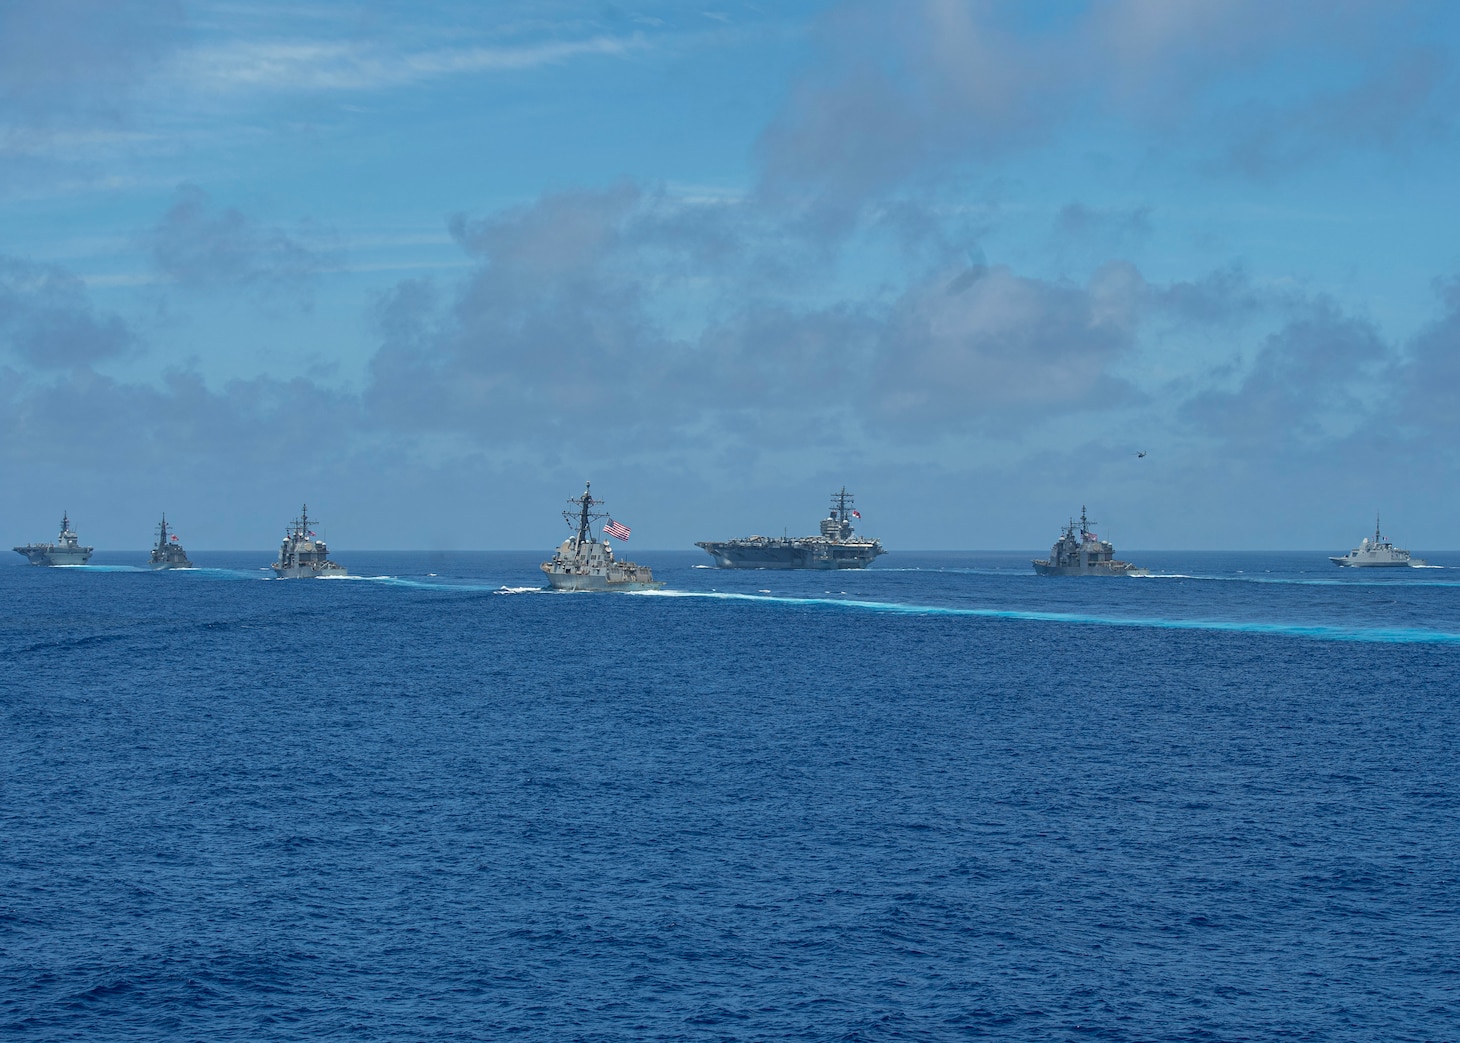 230609-N-MH015-1267 PACIFIC OCEAN (June 9, 2023) Ships from the Nimitz Carrier Strike Group (CSG), the Reagan CSG, Japan Maritime Self-Defense Force (JMSDF), and French Navy steam in formation during a multiple large deck event. Ships involved in the event are the Nimitz-class aircraft carriers USS Nimitz (CVN 68) and USS Ronald Reagan (CVN 76); the Ticonderoga-class guided-missile cruisers USS Robert Smalls (CG 62), USS Bunker Hill (CG 52) and USS Antietam (CG 54); the Arleigh Burke-class guided-missile destroyers USS Wayne E. Meyer (DDG 108), USS Rafael Peralta (DDG 115) and USS Chung-Hoon (DDG 93); JMSDF Izumo-class destroyer JS Izumo (DDH 183) and Murasame-class destroyer JS Samidare (DD 106); and French Navy Aquitaine-class frigate FS Lorraine (D 657). Nimitz is in U.S. 7th Fleet conducting routine operations. U.S. 7th Fleet is the U.S. Navy's largest forward-deployed numbered fleet, and routinely interacts and operates with allies and partners in preserving a free and open Indo-Pacific region. (U.S. Navy photo by Mass Communication Specialist 2nd Class Joseph Calabrese)